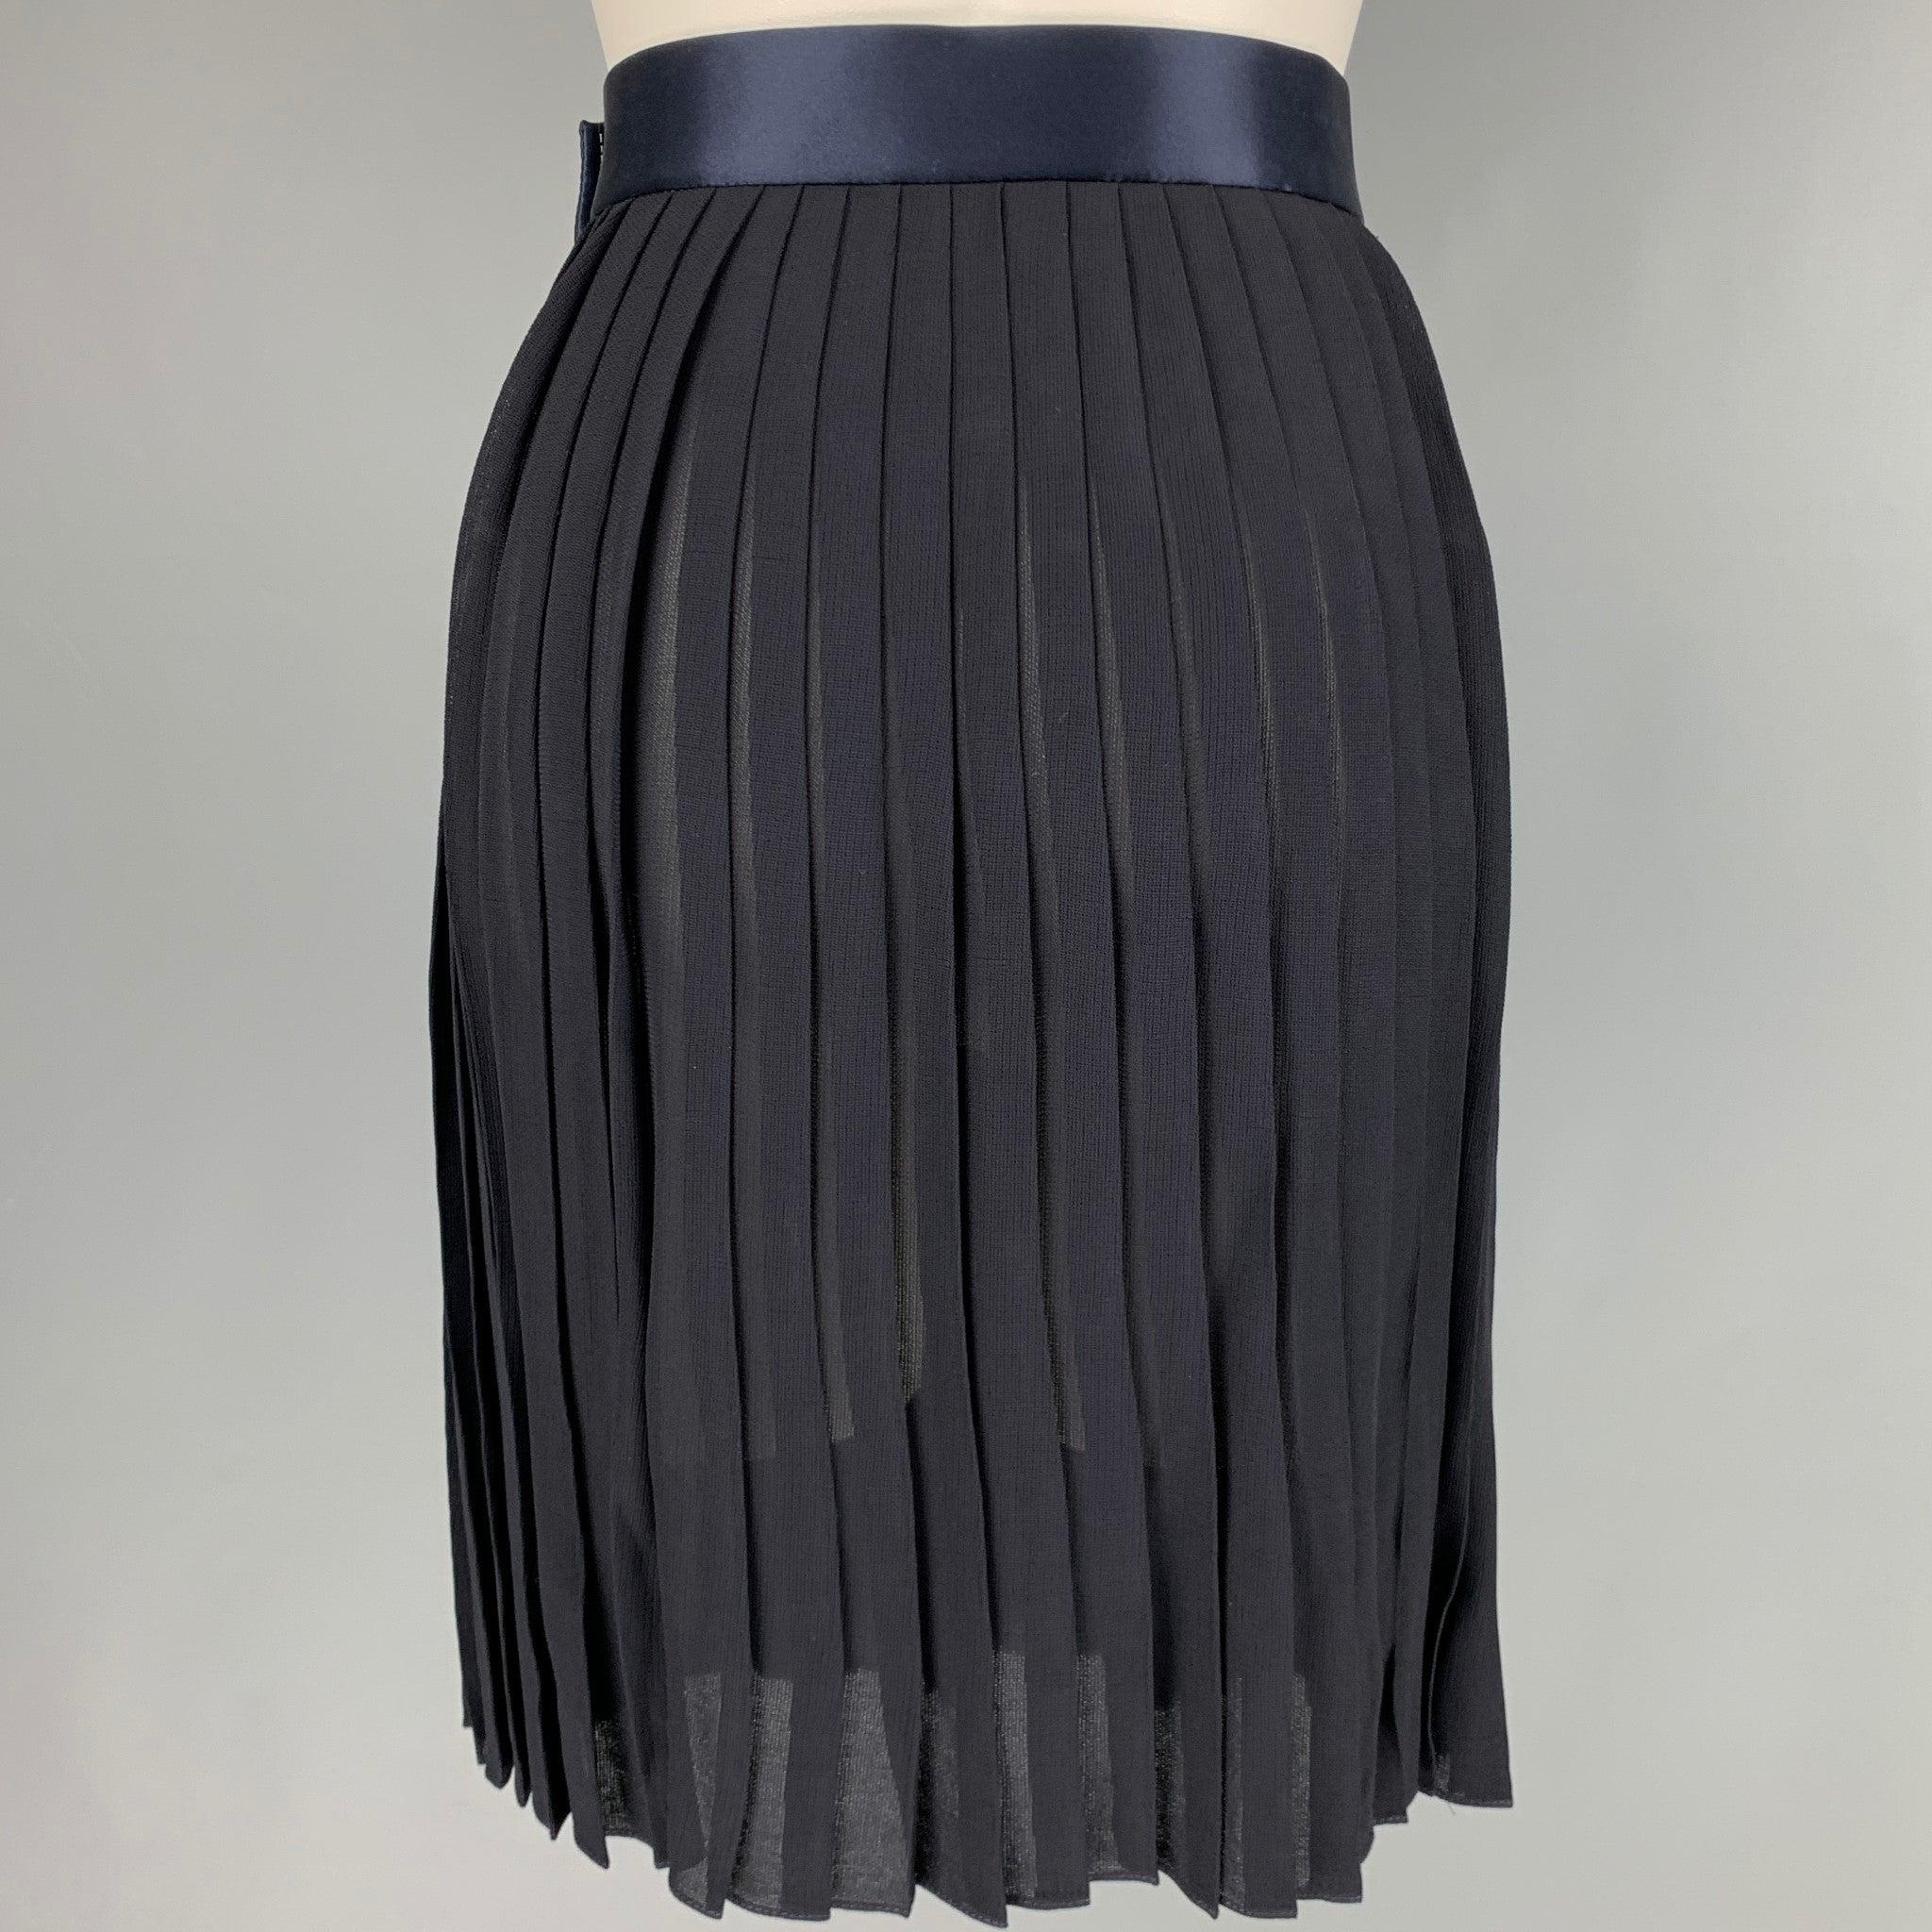 DONNA KARAN skirt
in a
navy rayon fabric featuring a pleated style, below knee length, satin waistband, and side snap closure. Made in USA.Excellent Pre-Owned Condition. 

Marked:   8 

Measurements: 
  Waist: 26 inches Hip: 36 inches Length: 20